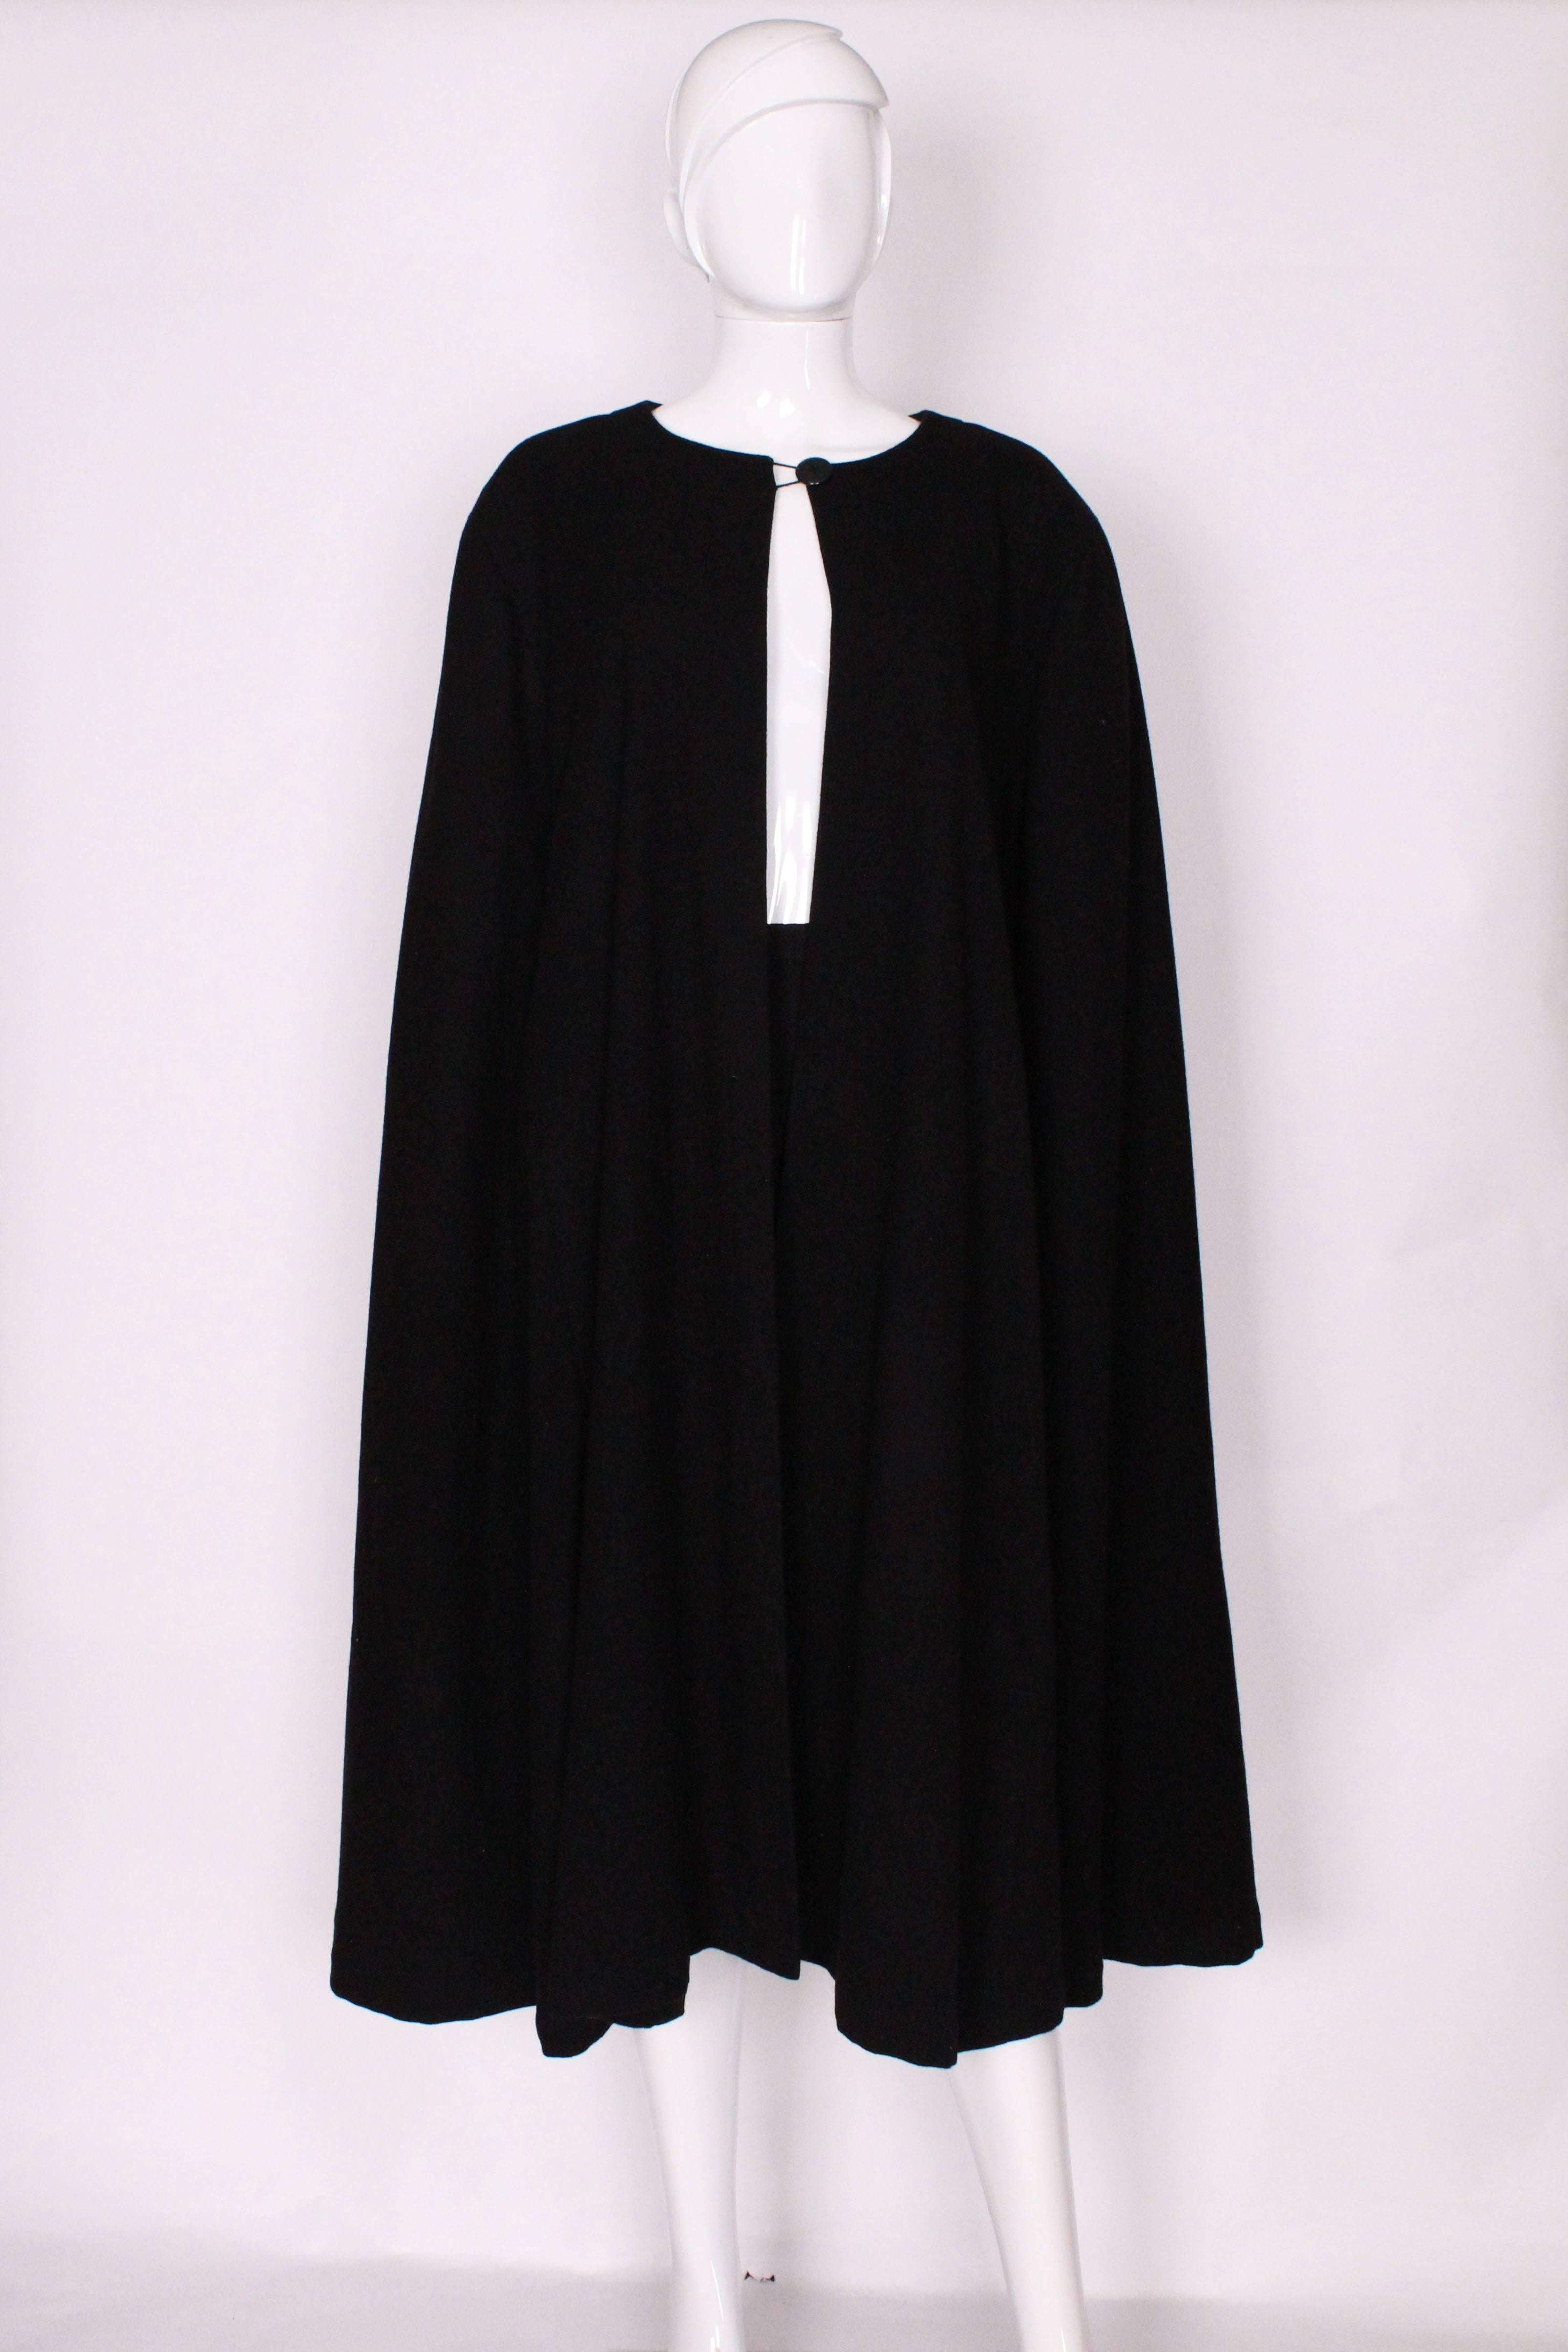 A stunning black wool cape by Yves Saint Laurent, Rive Gauche.The cape is collarless, with a single button fastening at the neck.